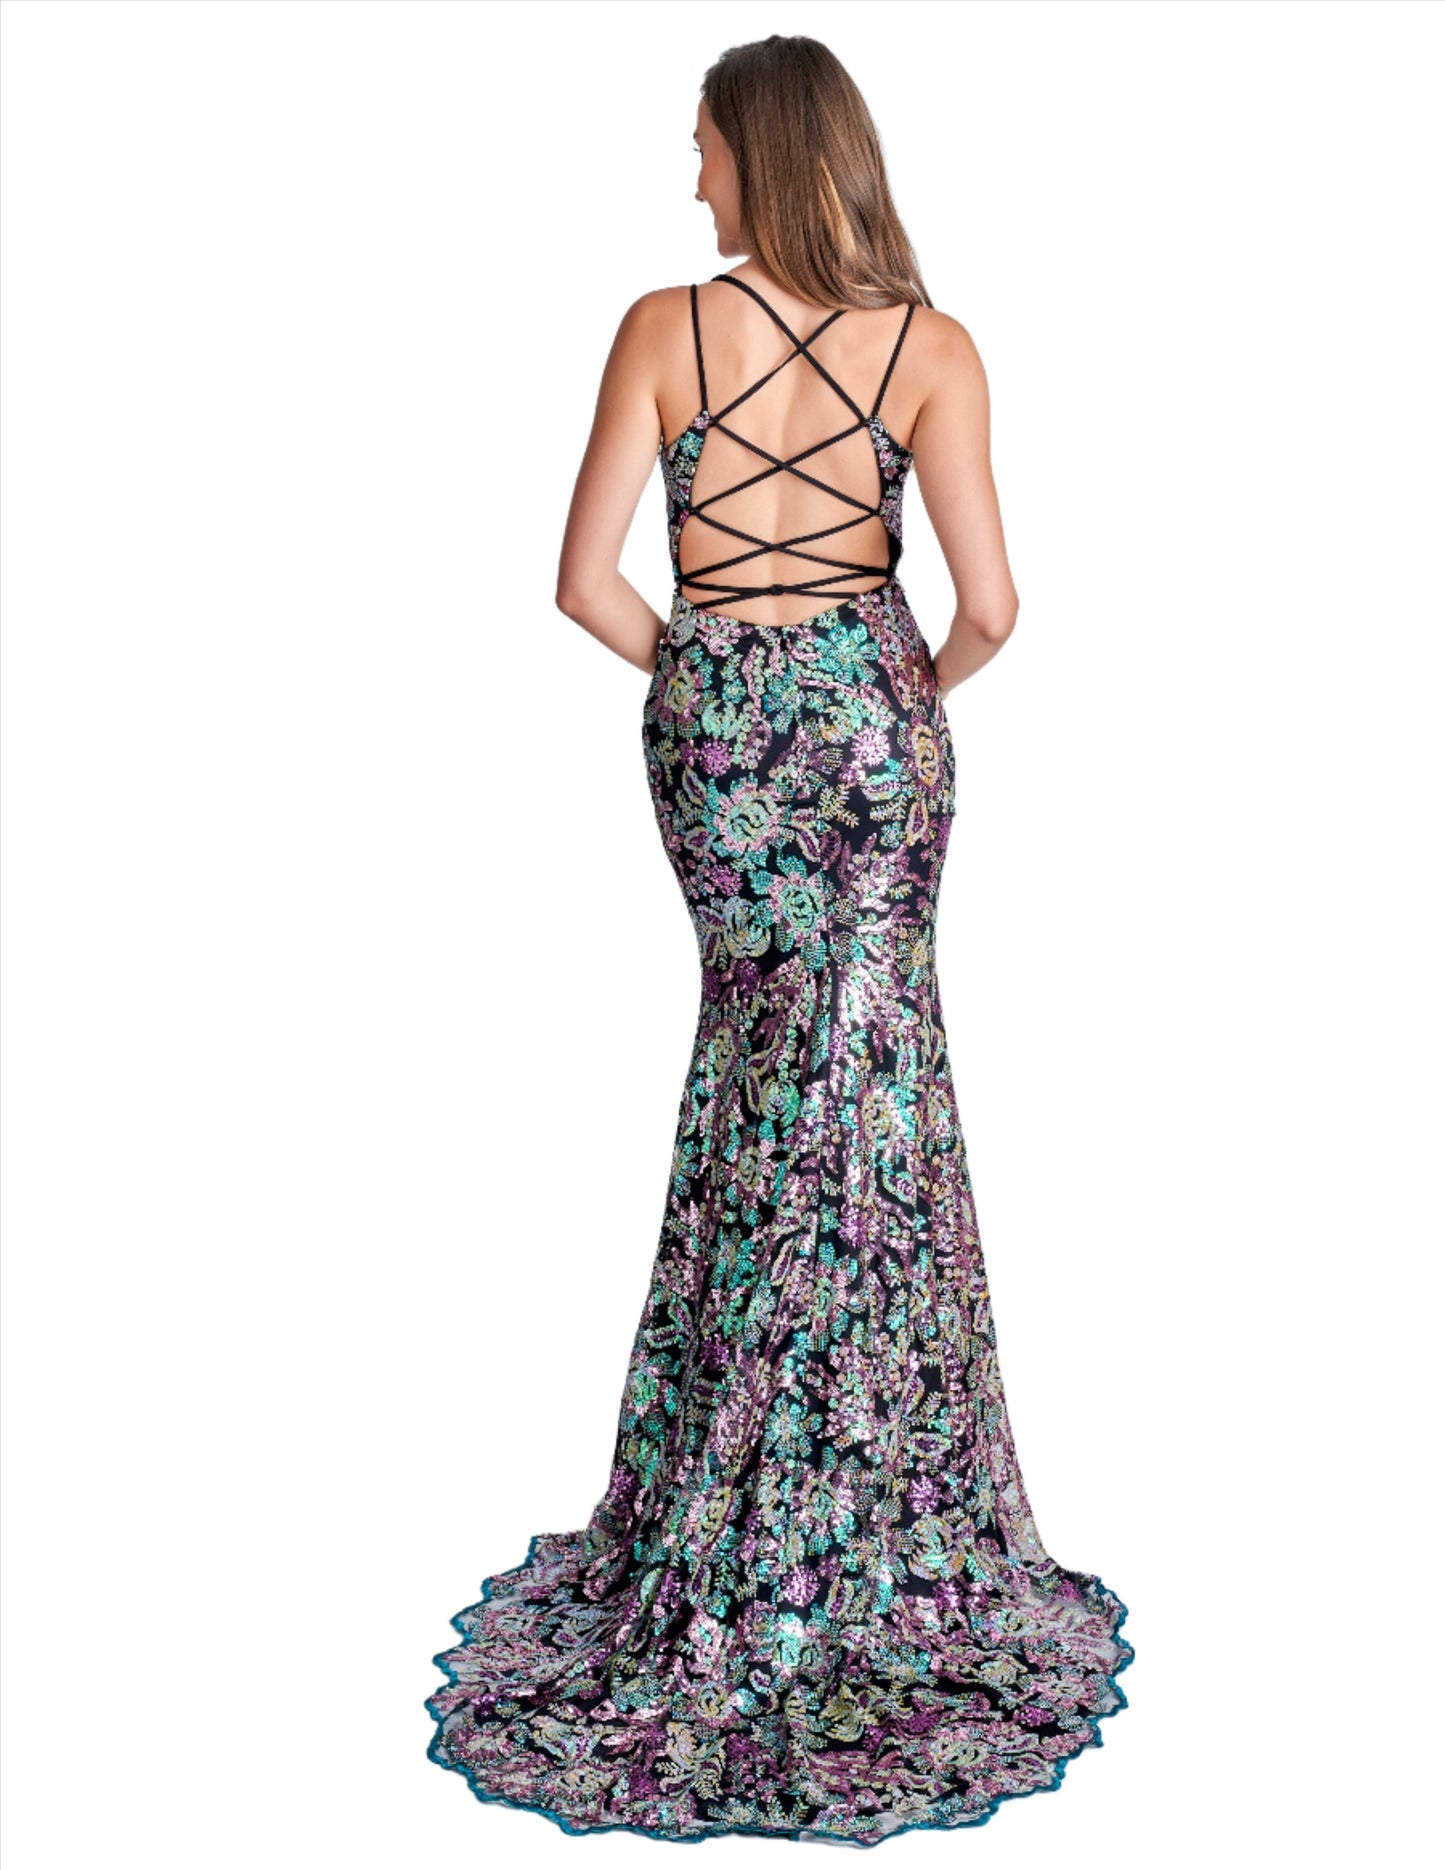 Elevate your formal event with the stunning Nina Canacci 2382 Sequin Print Formal Prom Dress. The backless corset and V-neckline exude an alluring elegance, while the sequin print adds a touch of glamour. Make a statement and shine bright in this evening gown.  Sizes: 0-6  Colors: Black Pink Multi